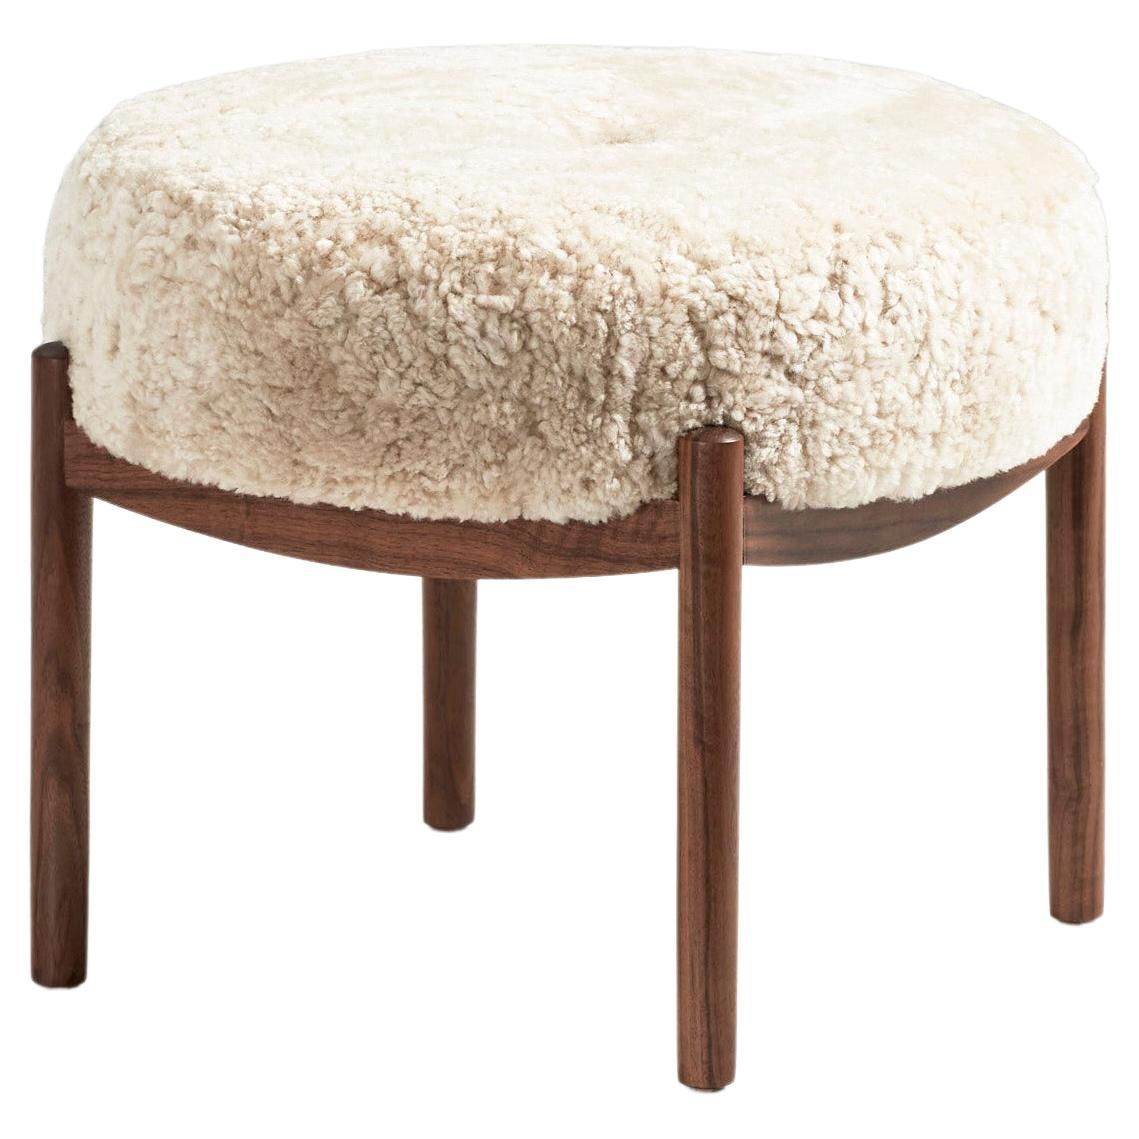 Custom Made Walnut And Shearling Round Ottoman For Sale At 1stdibs Within Satin Black Shearling Ottomans (View 1 of 15)